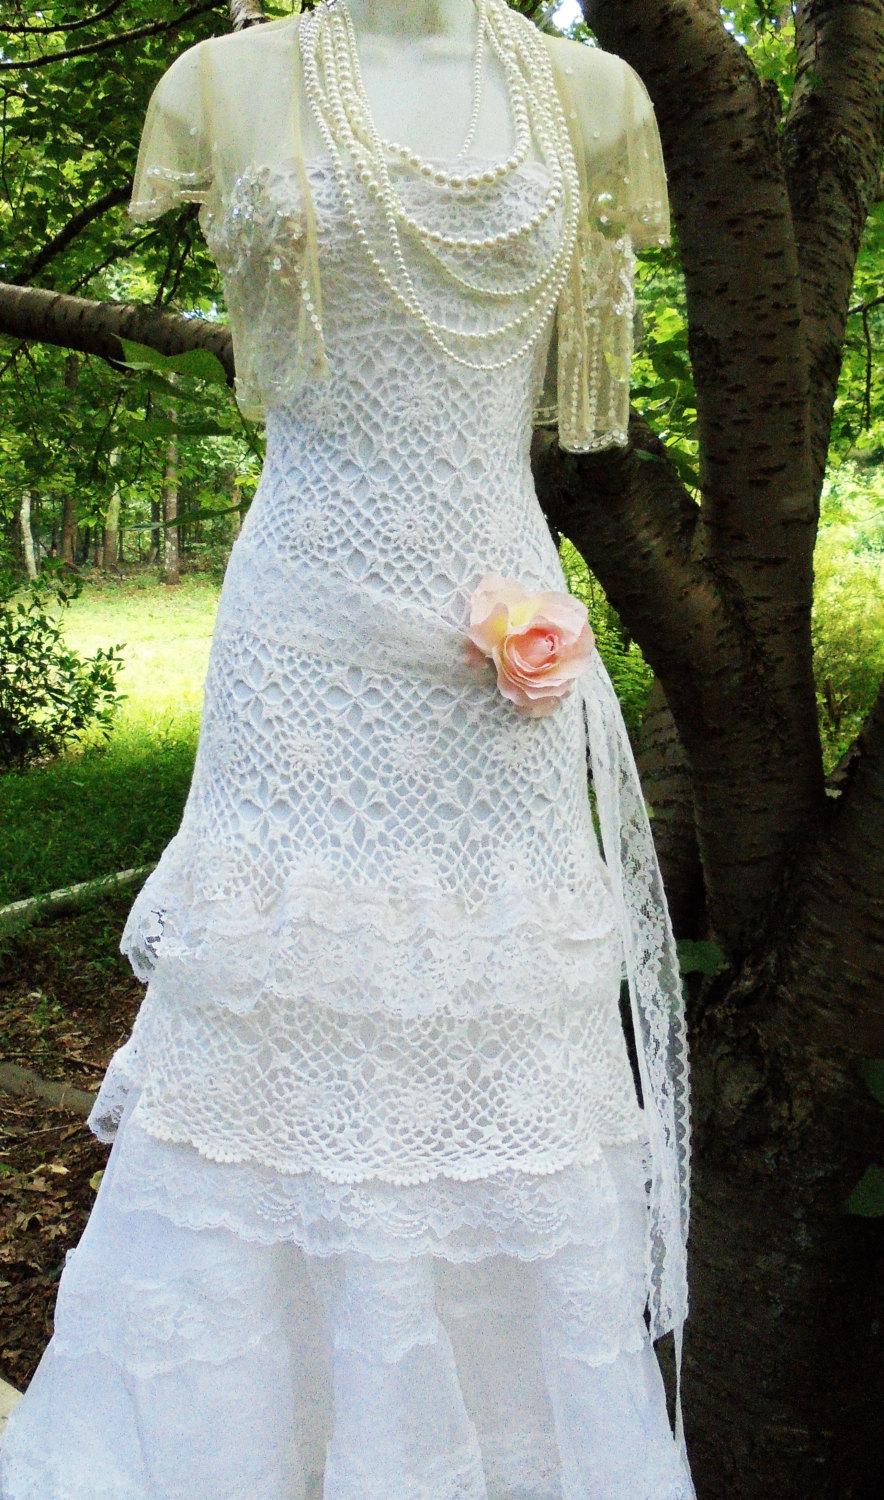 Wedding - Crochet lace dress wedding white ivory strapless lace tulle tiered boho  vintage  bride outdoor  romantic medium by vintage opulence on Etsy